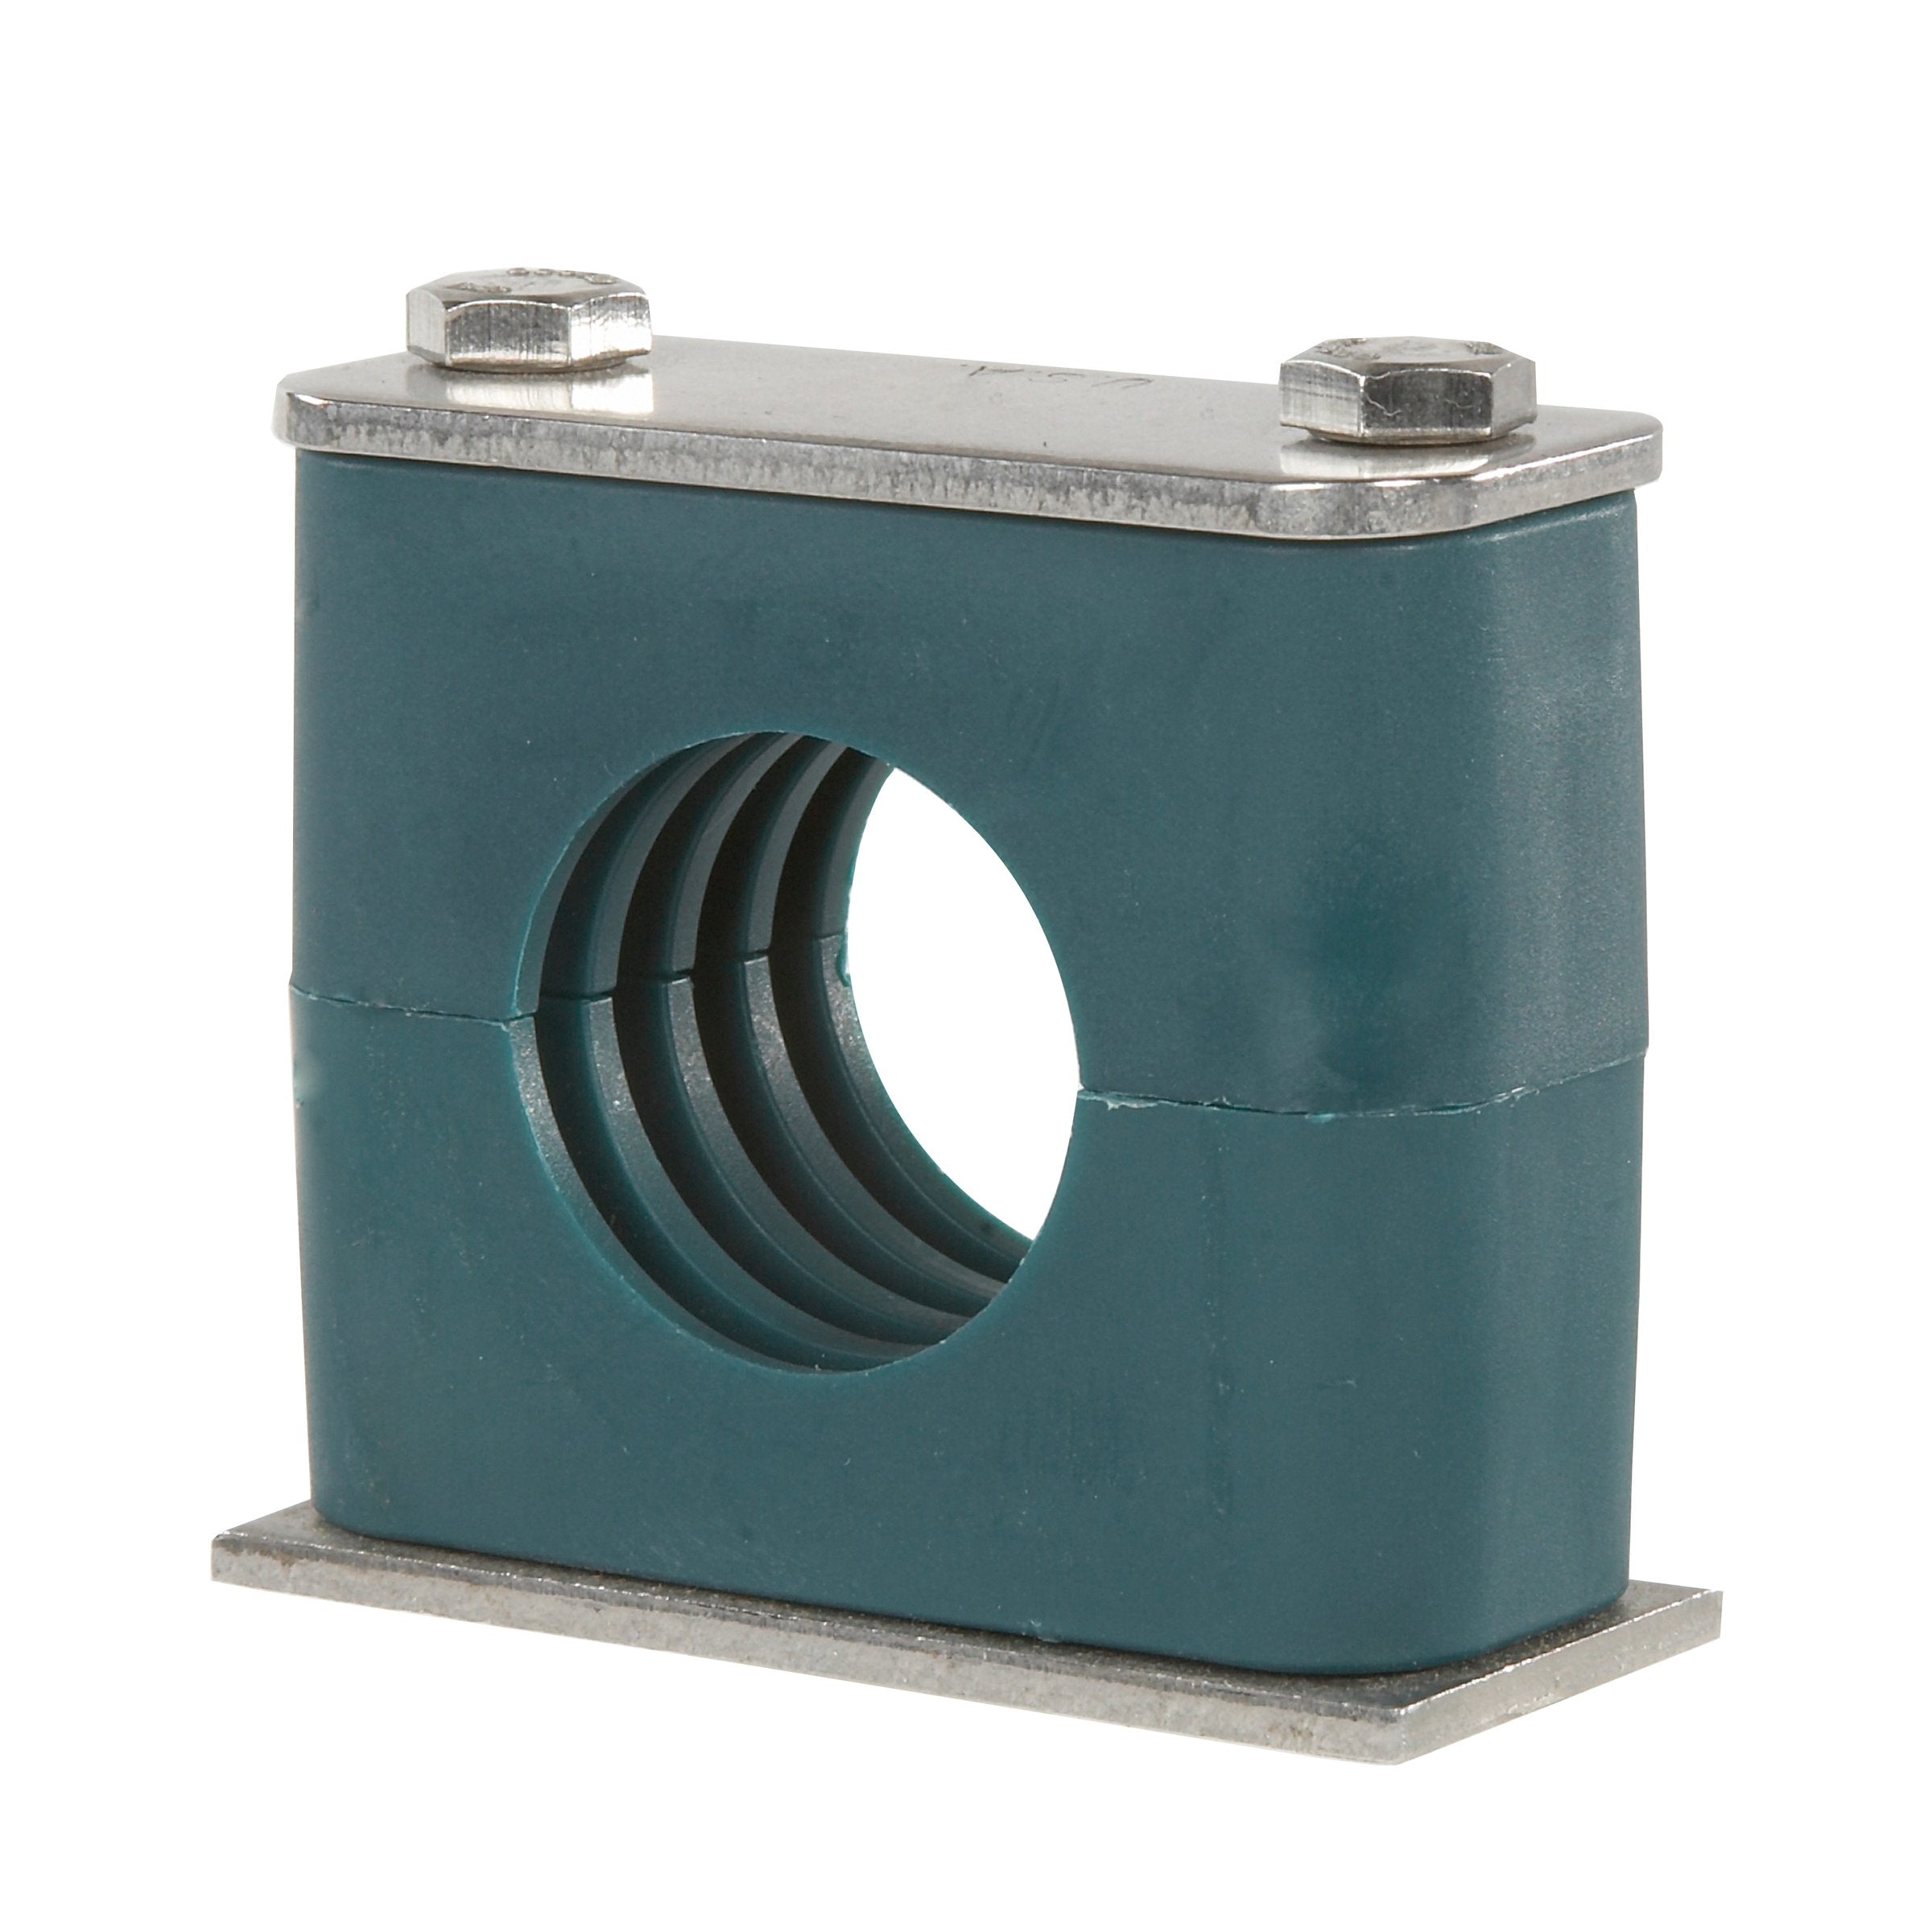 SP-538-PP-DP-AS-U-W5 : Stauff Clamp, Single Weld Plate, 1.5 inch (38mm) OD, for 1.5" Tube, Green PP Insert, Profiled Interior, 316SS